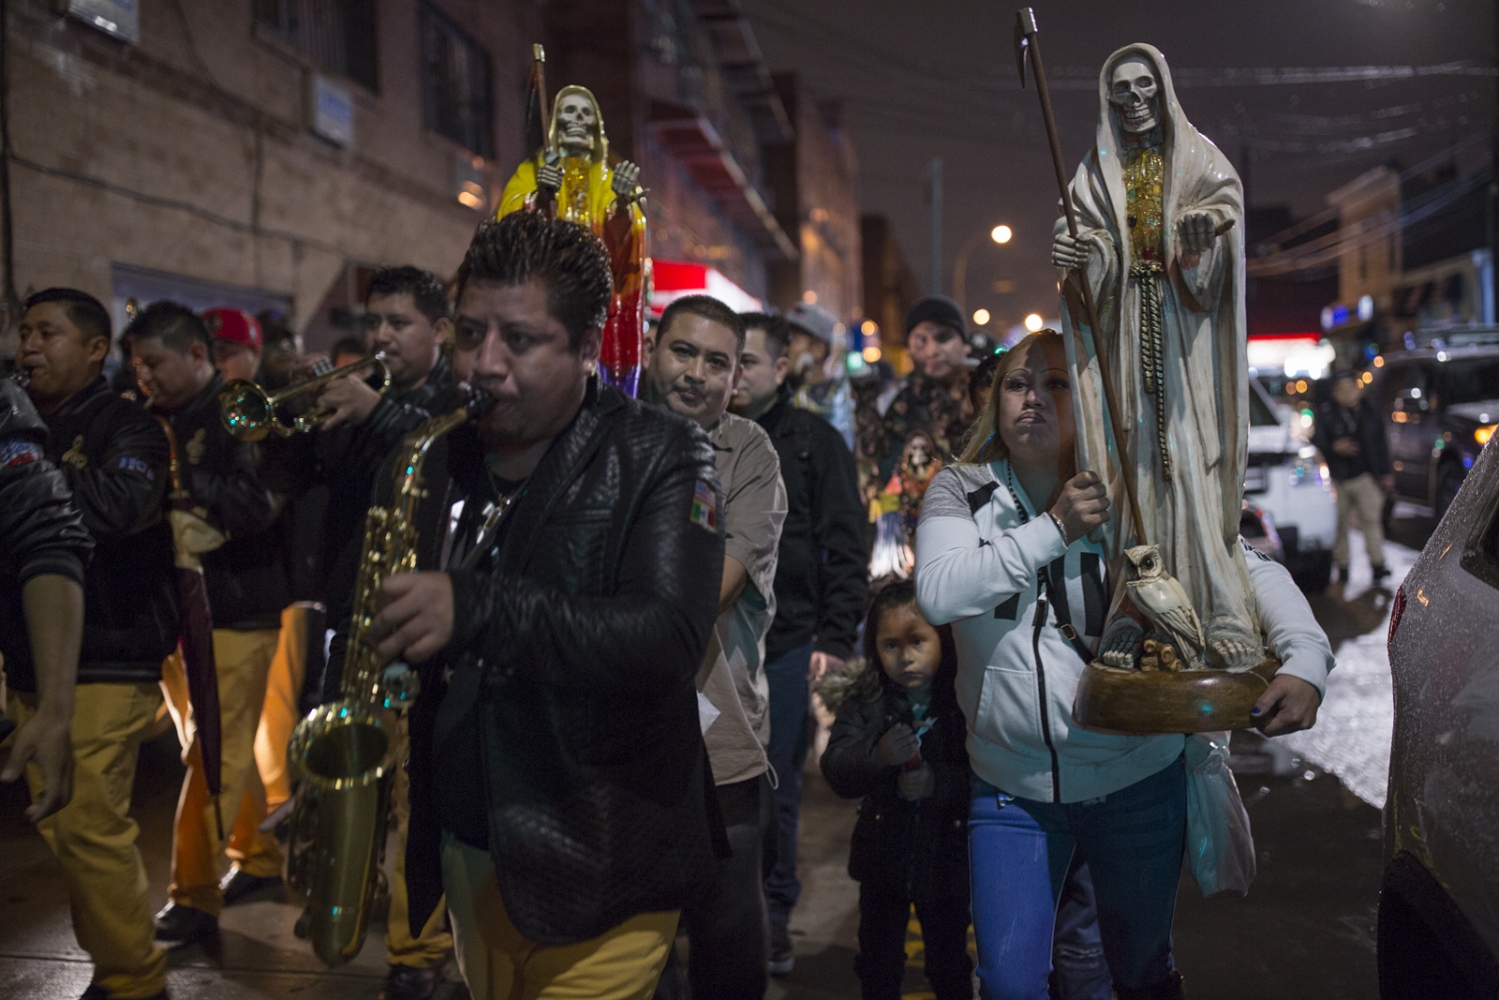 Santa Muerte devotees march in Queens New York, during a Day of the Dead celebration.